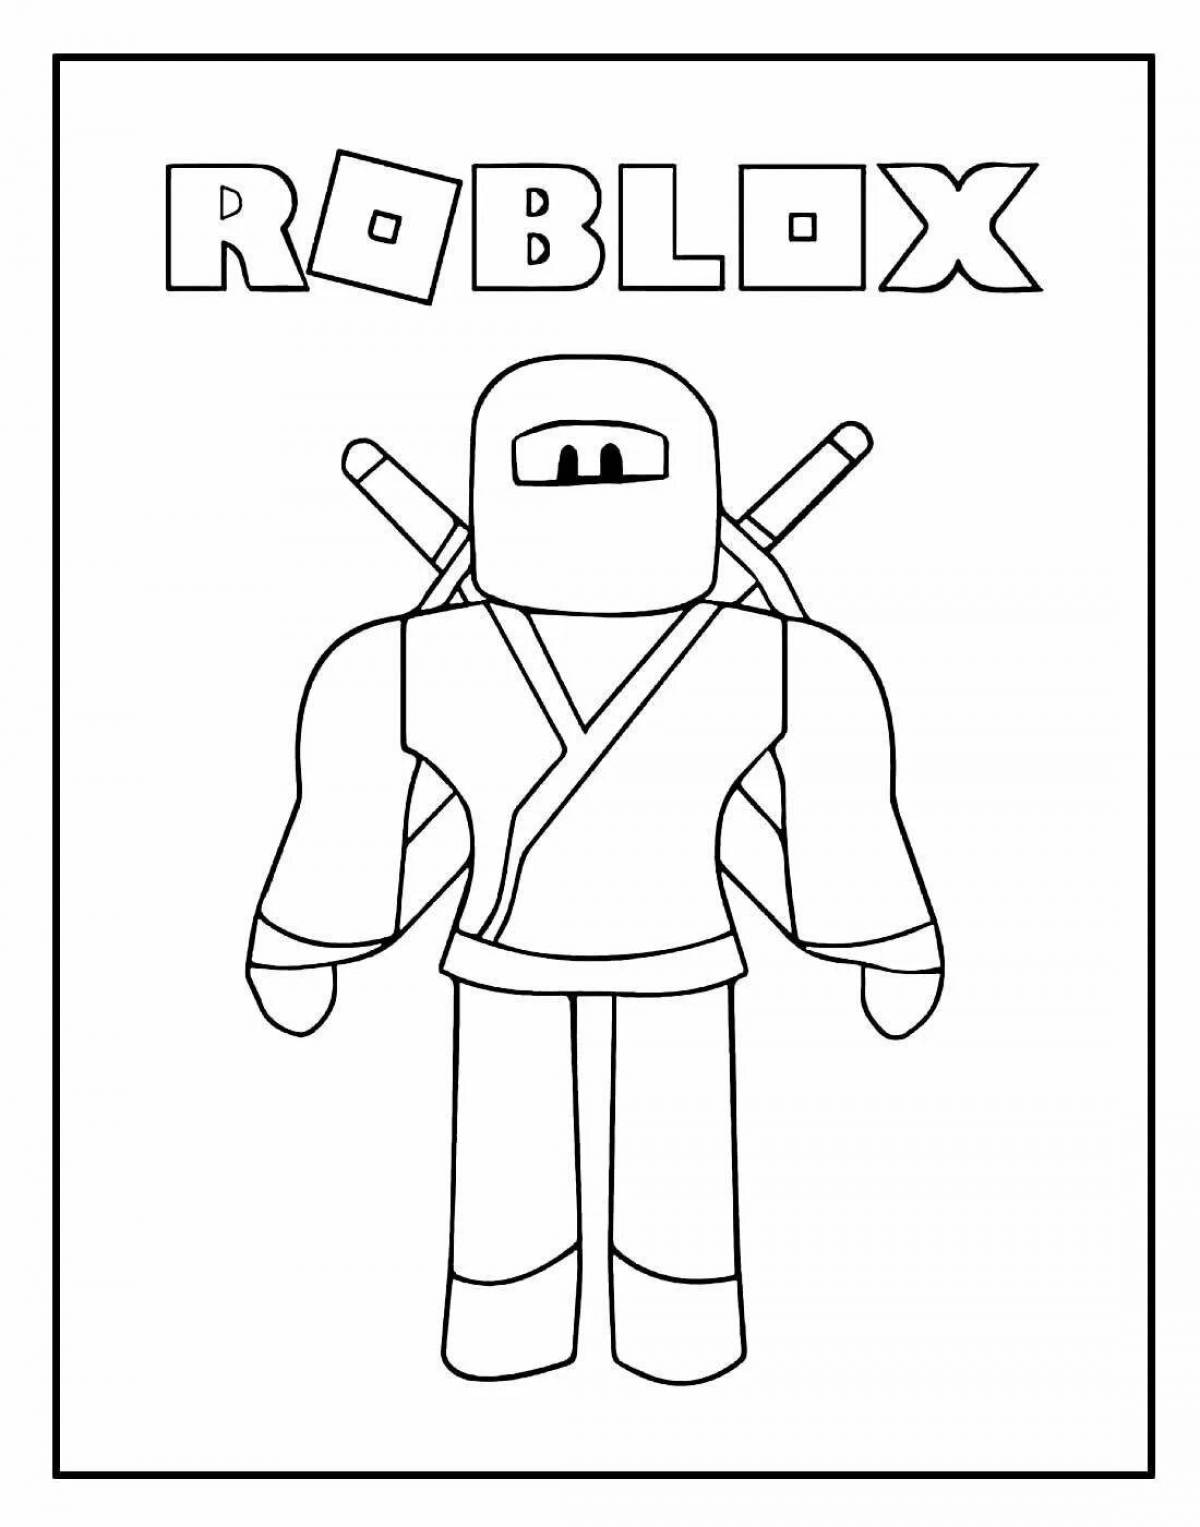 Colorful donator roblox coloring page